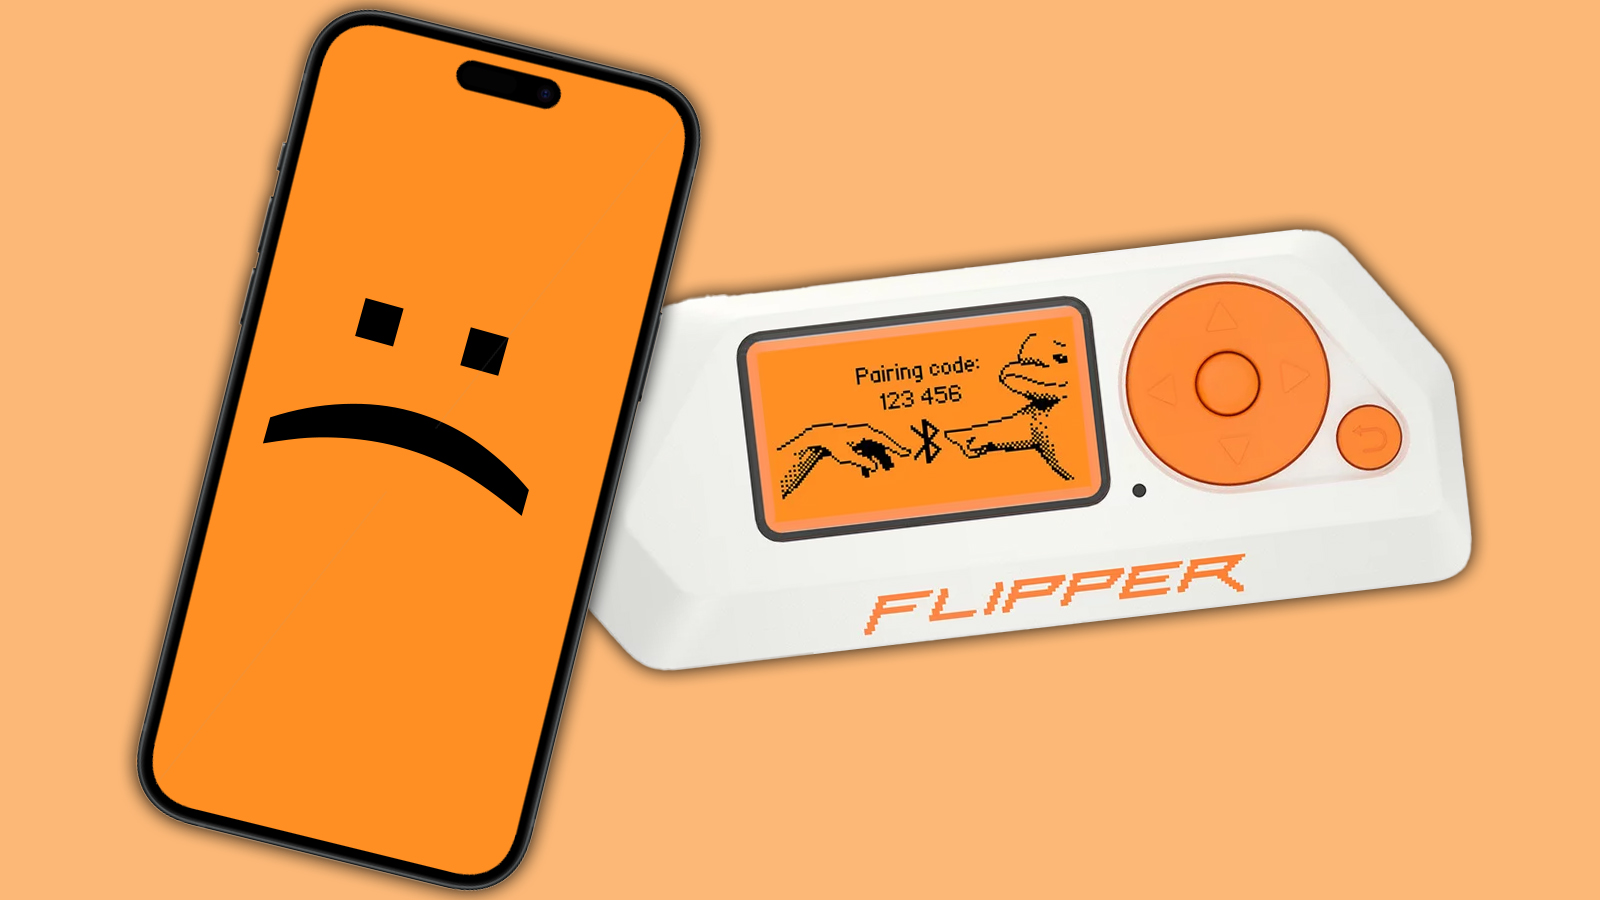 Flipper Zero device being used for trouble